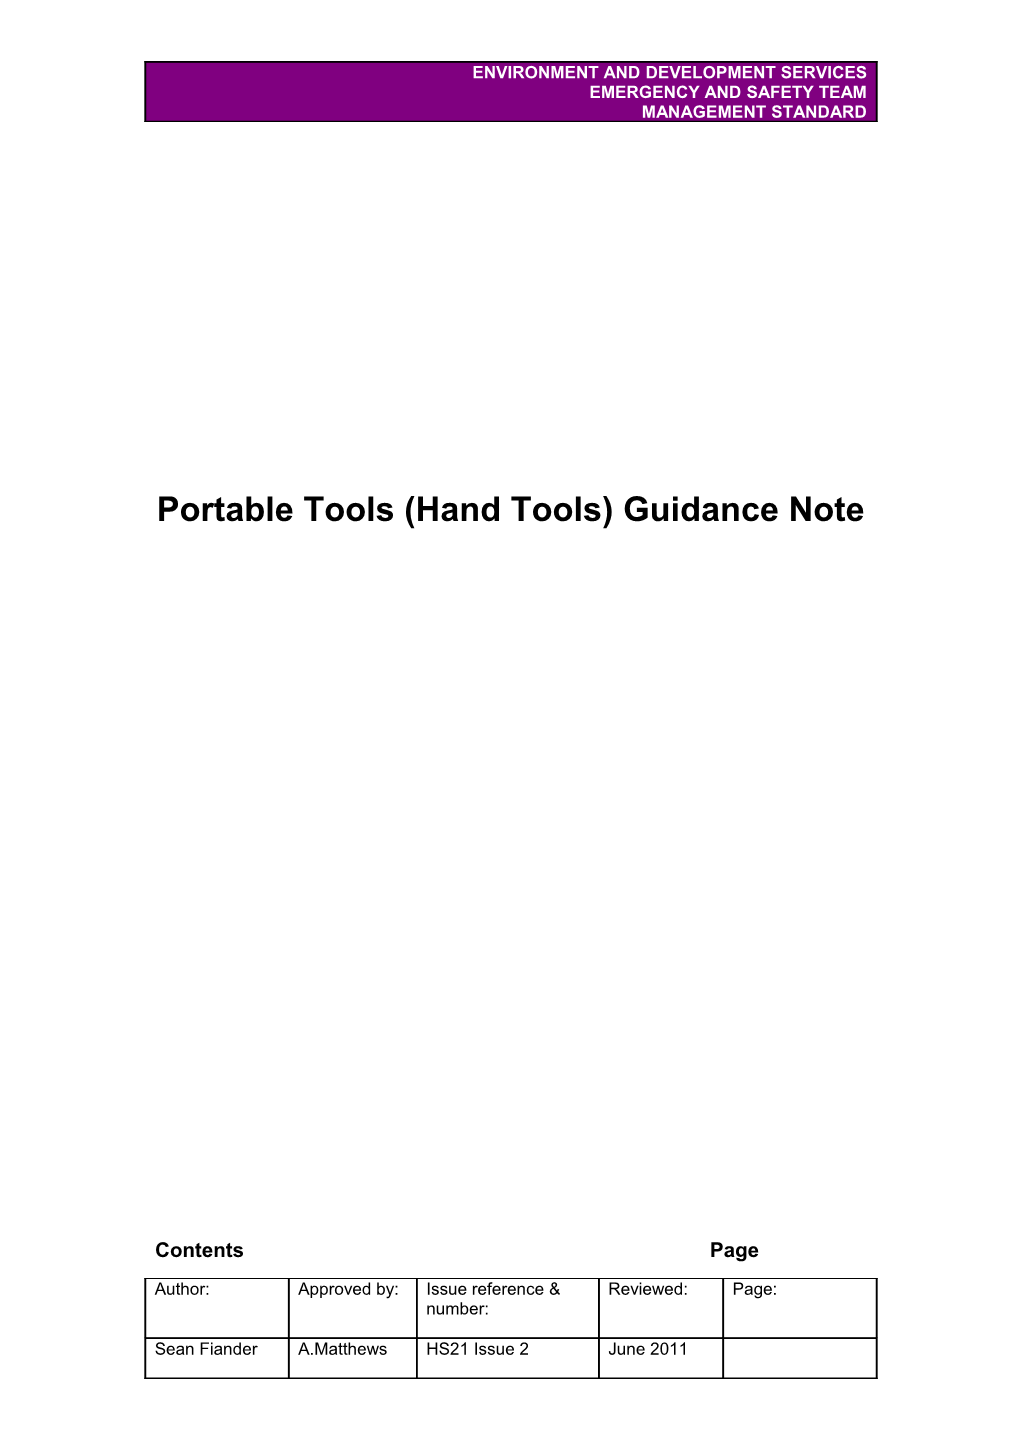 Portable Tools (Hand Tools) Guidance Note